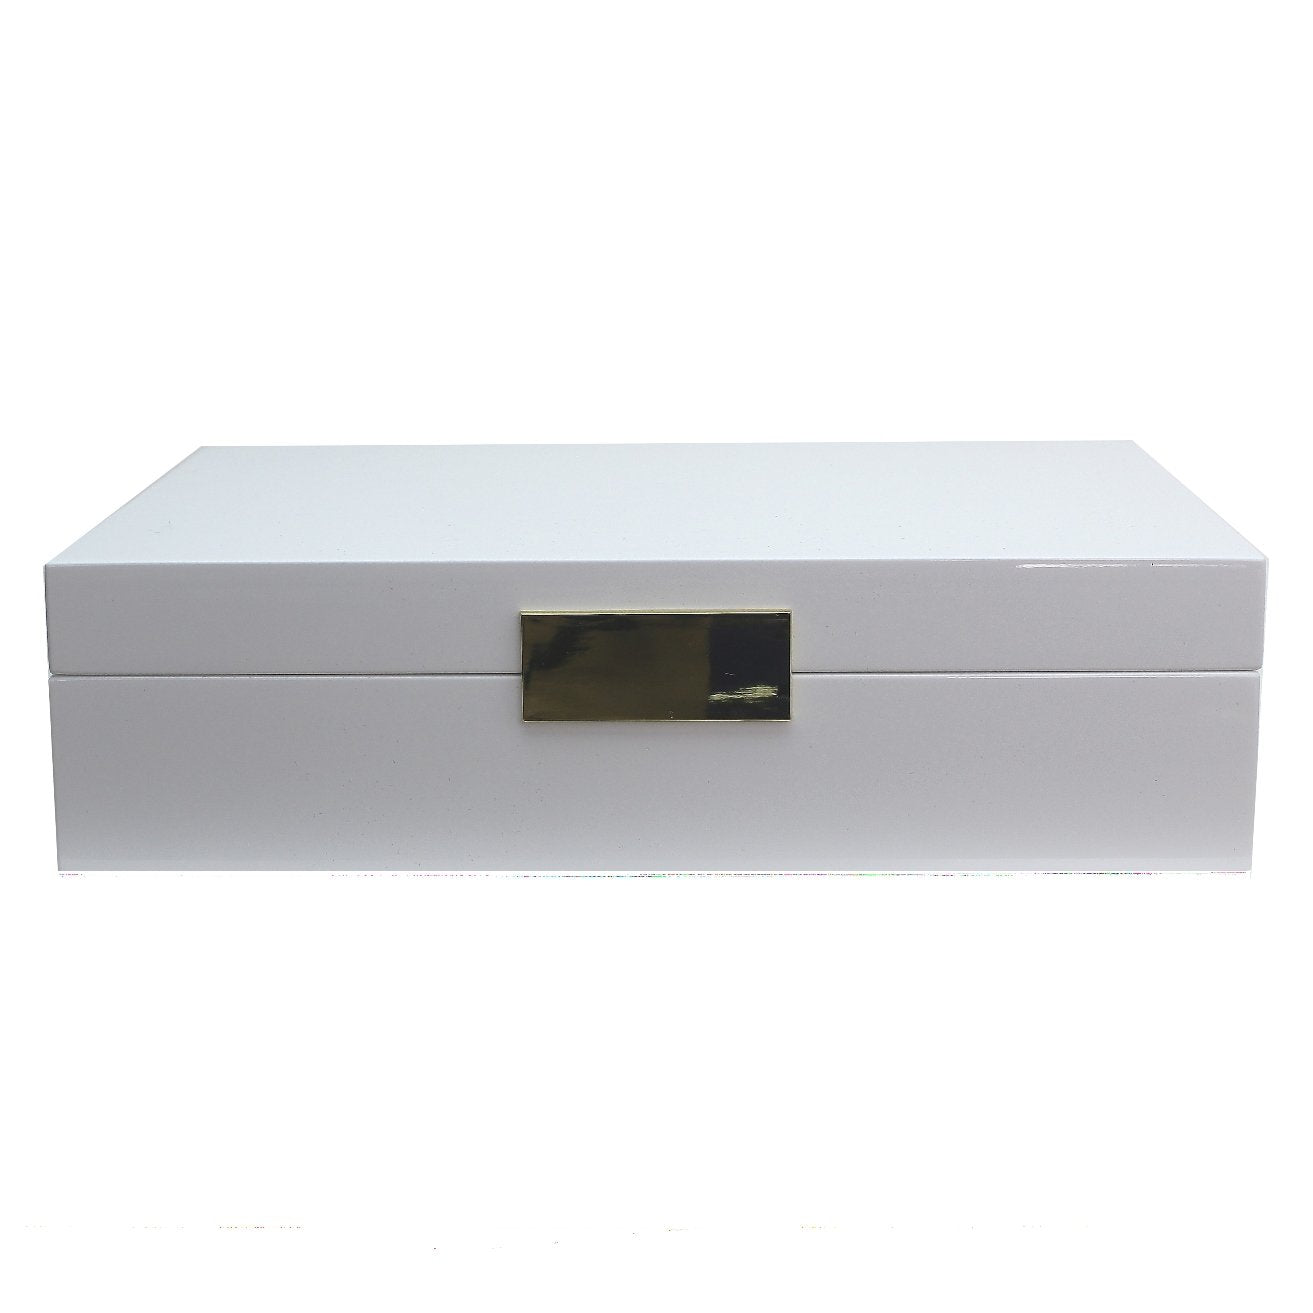 Large white glasses box with gold plated clasp